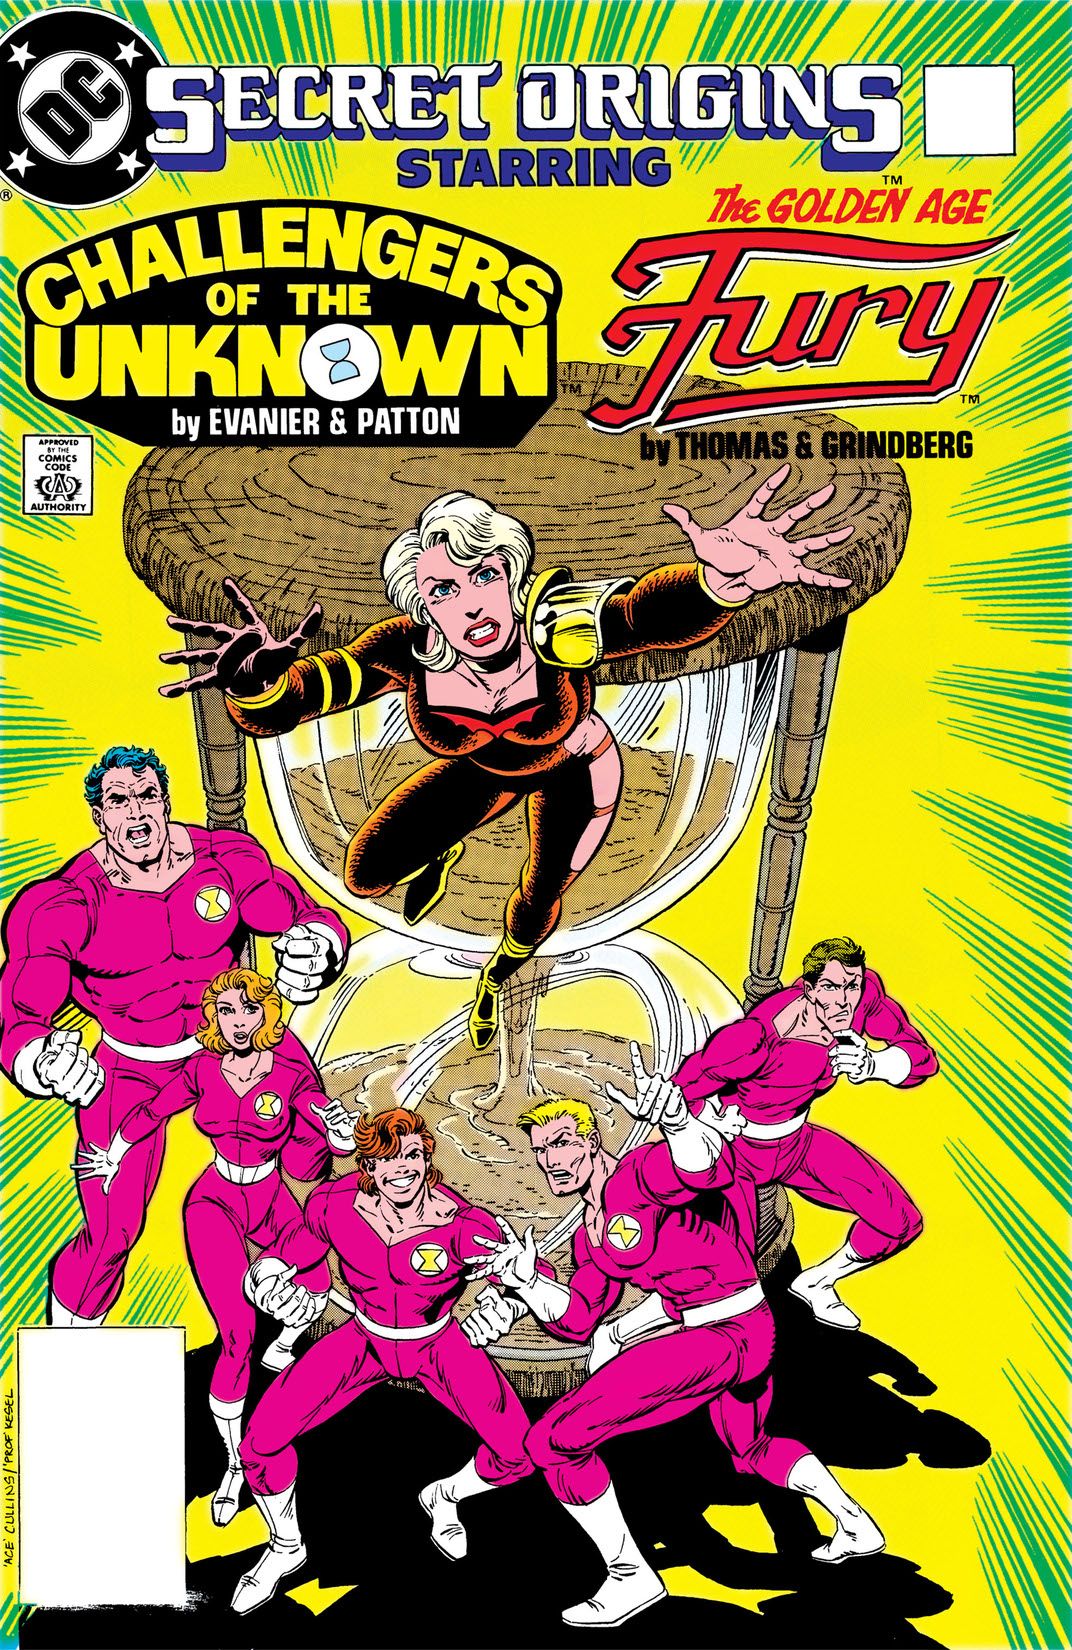 Secret Origins #12 - The Secret Origin of the Golden Age Fury; Challengers of the Unknown released by DC Comics on March 1987